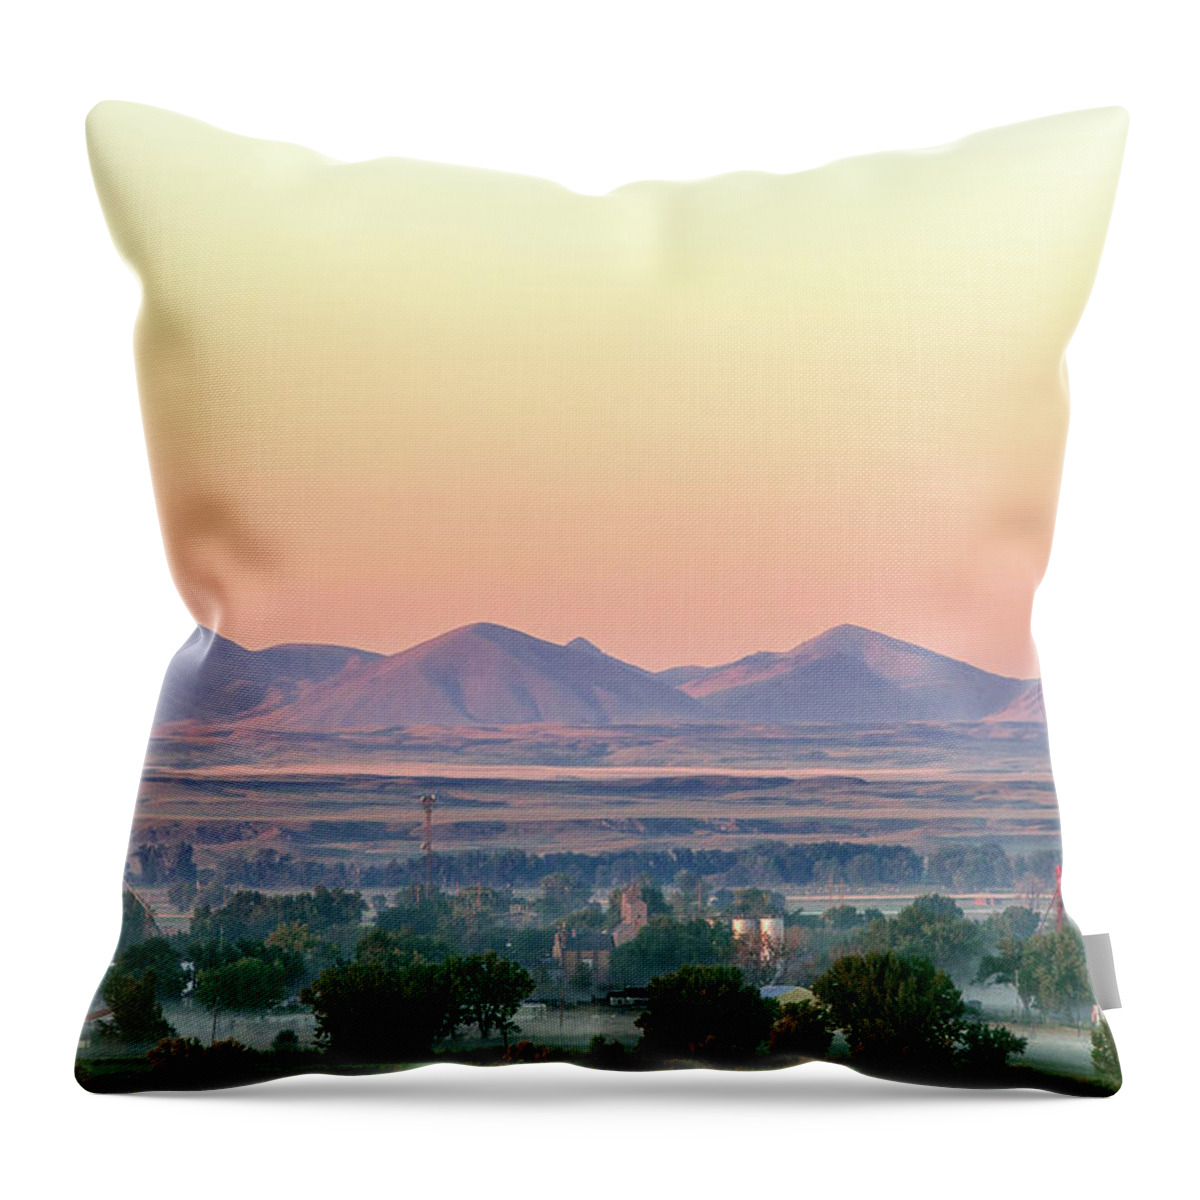 Harlem Throw Pillow featuring the photograph Foggy Harlem Bottom by Todd Klassy